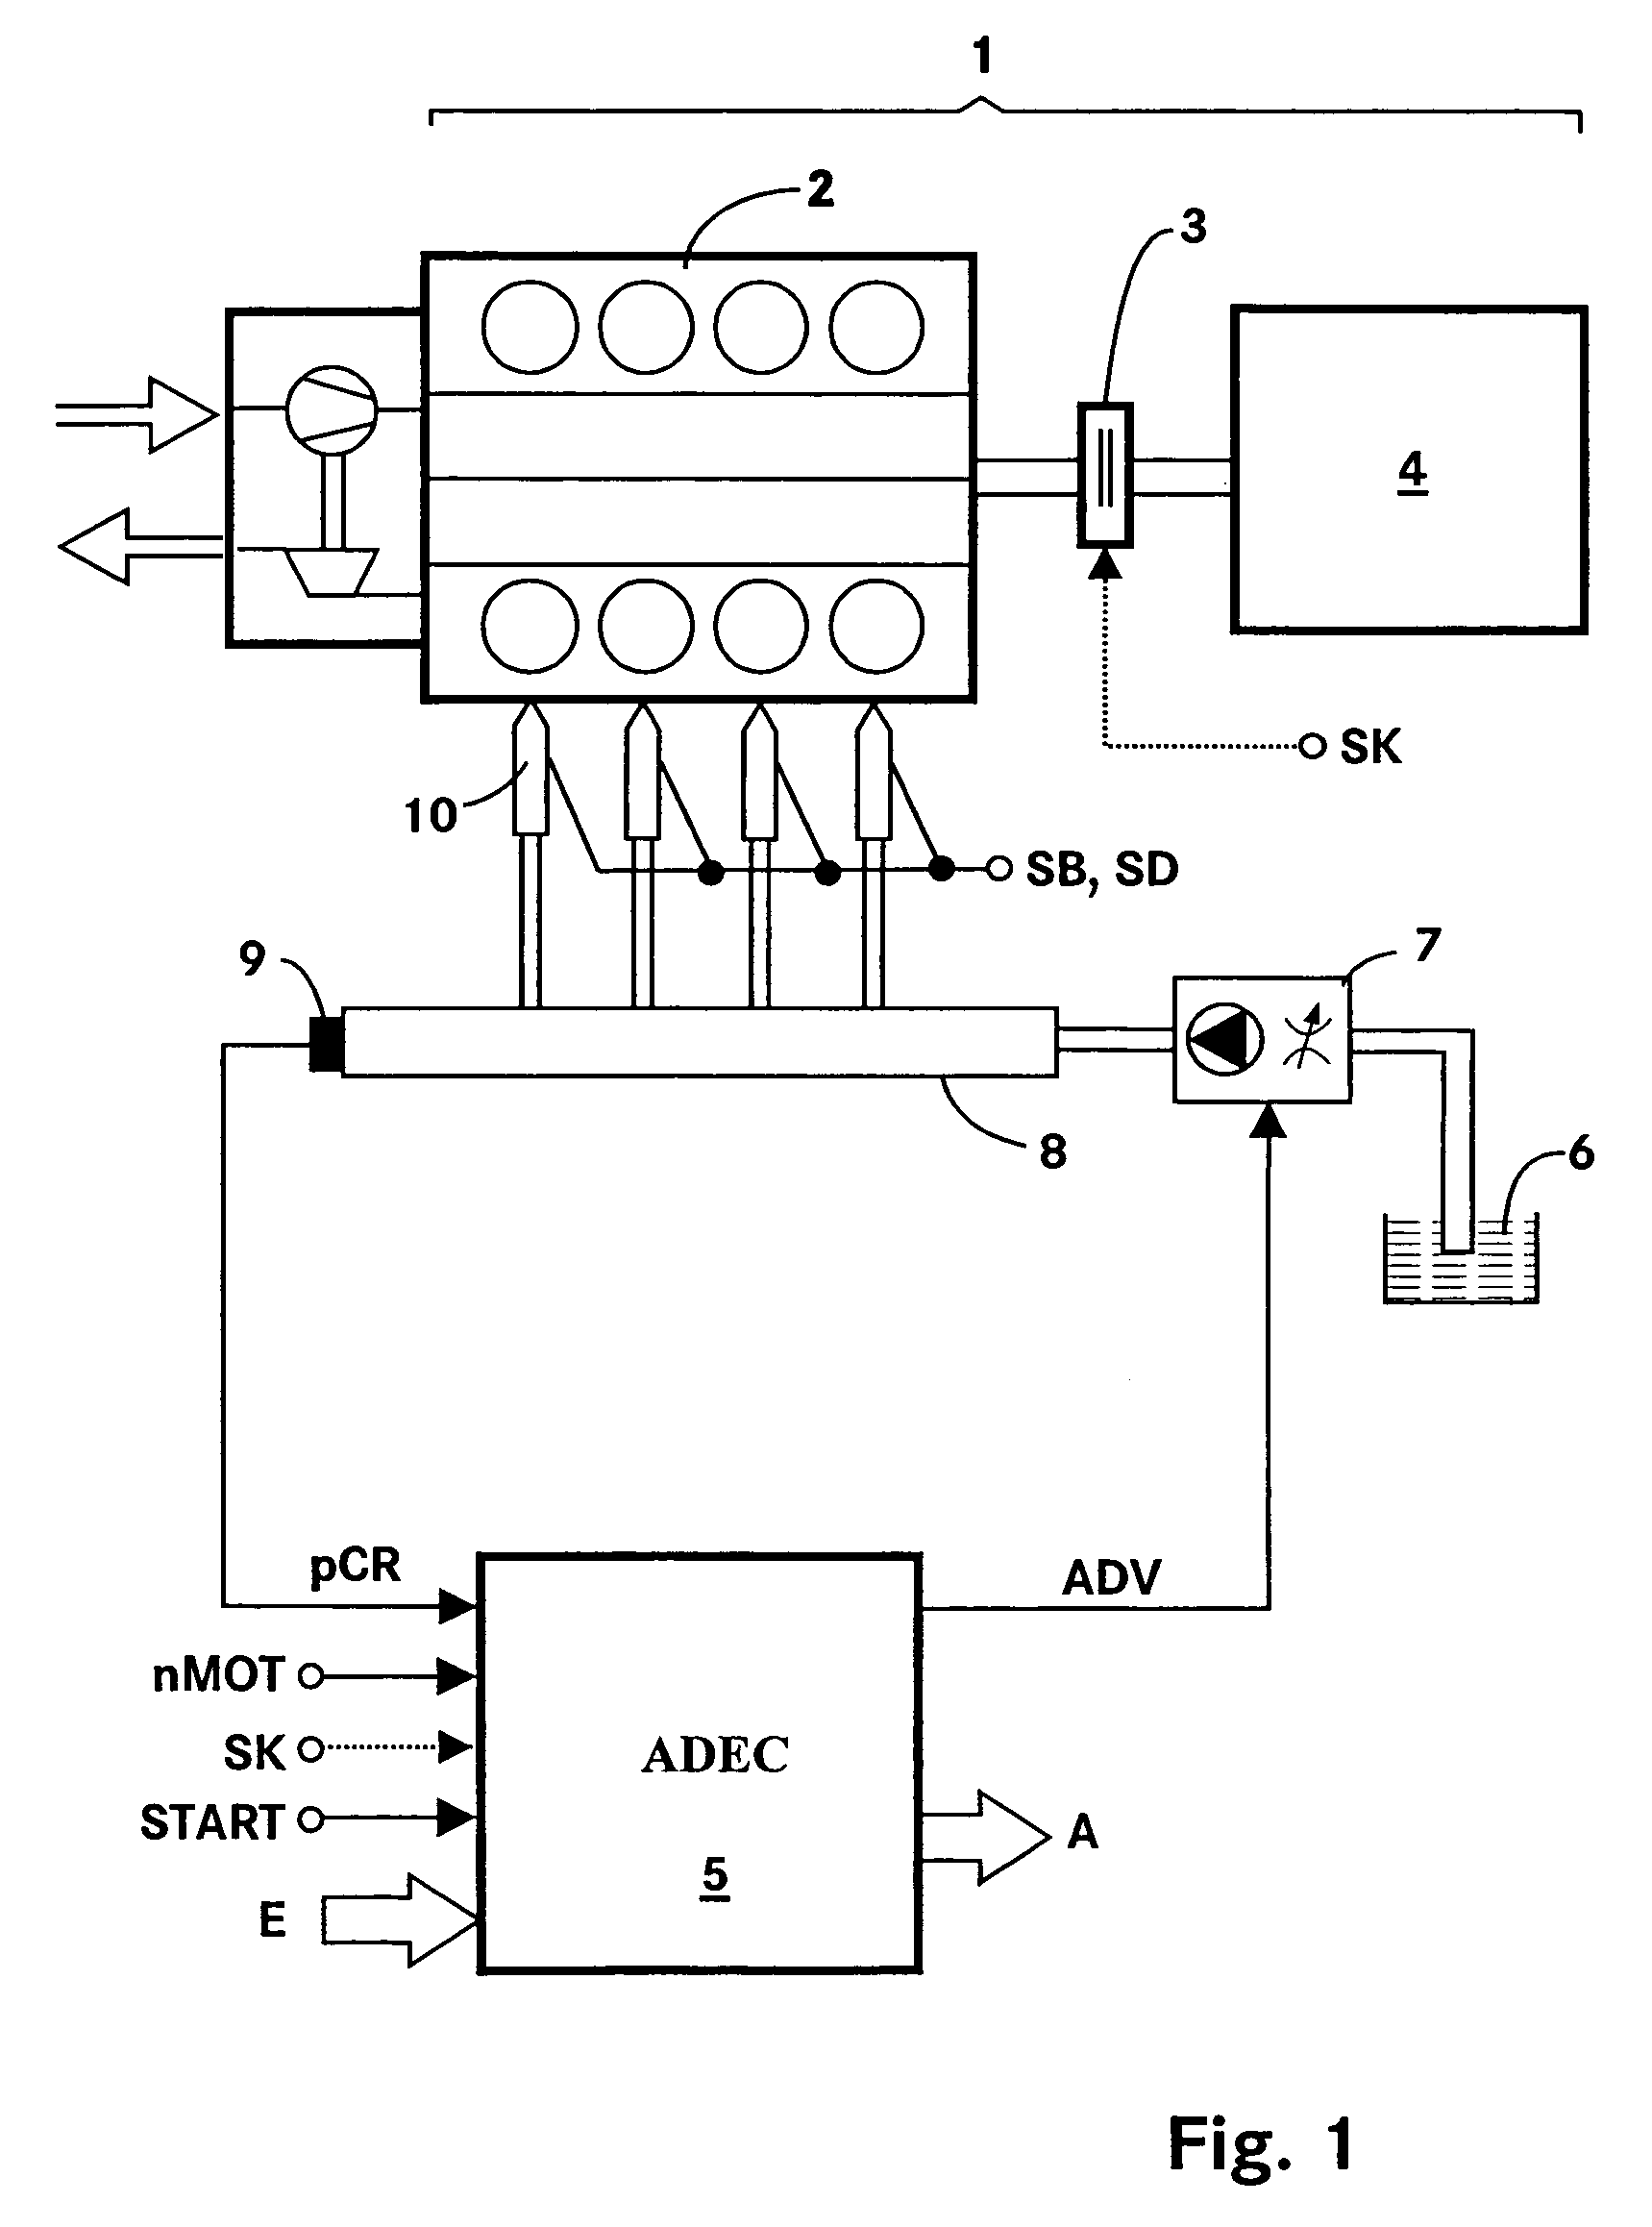 Method for the closed-loop speed control of an internal combustion engine-generator unit